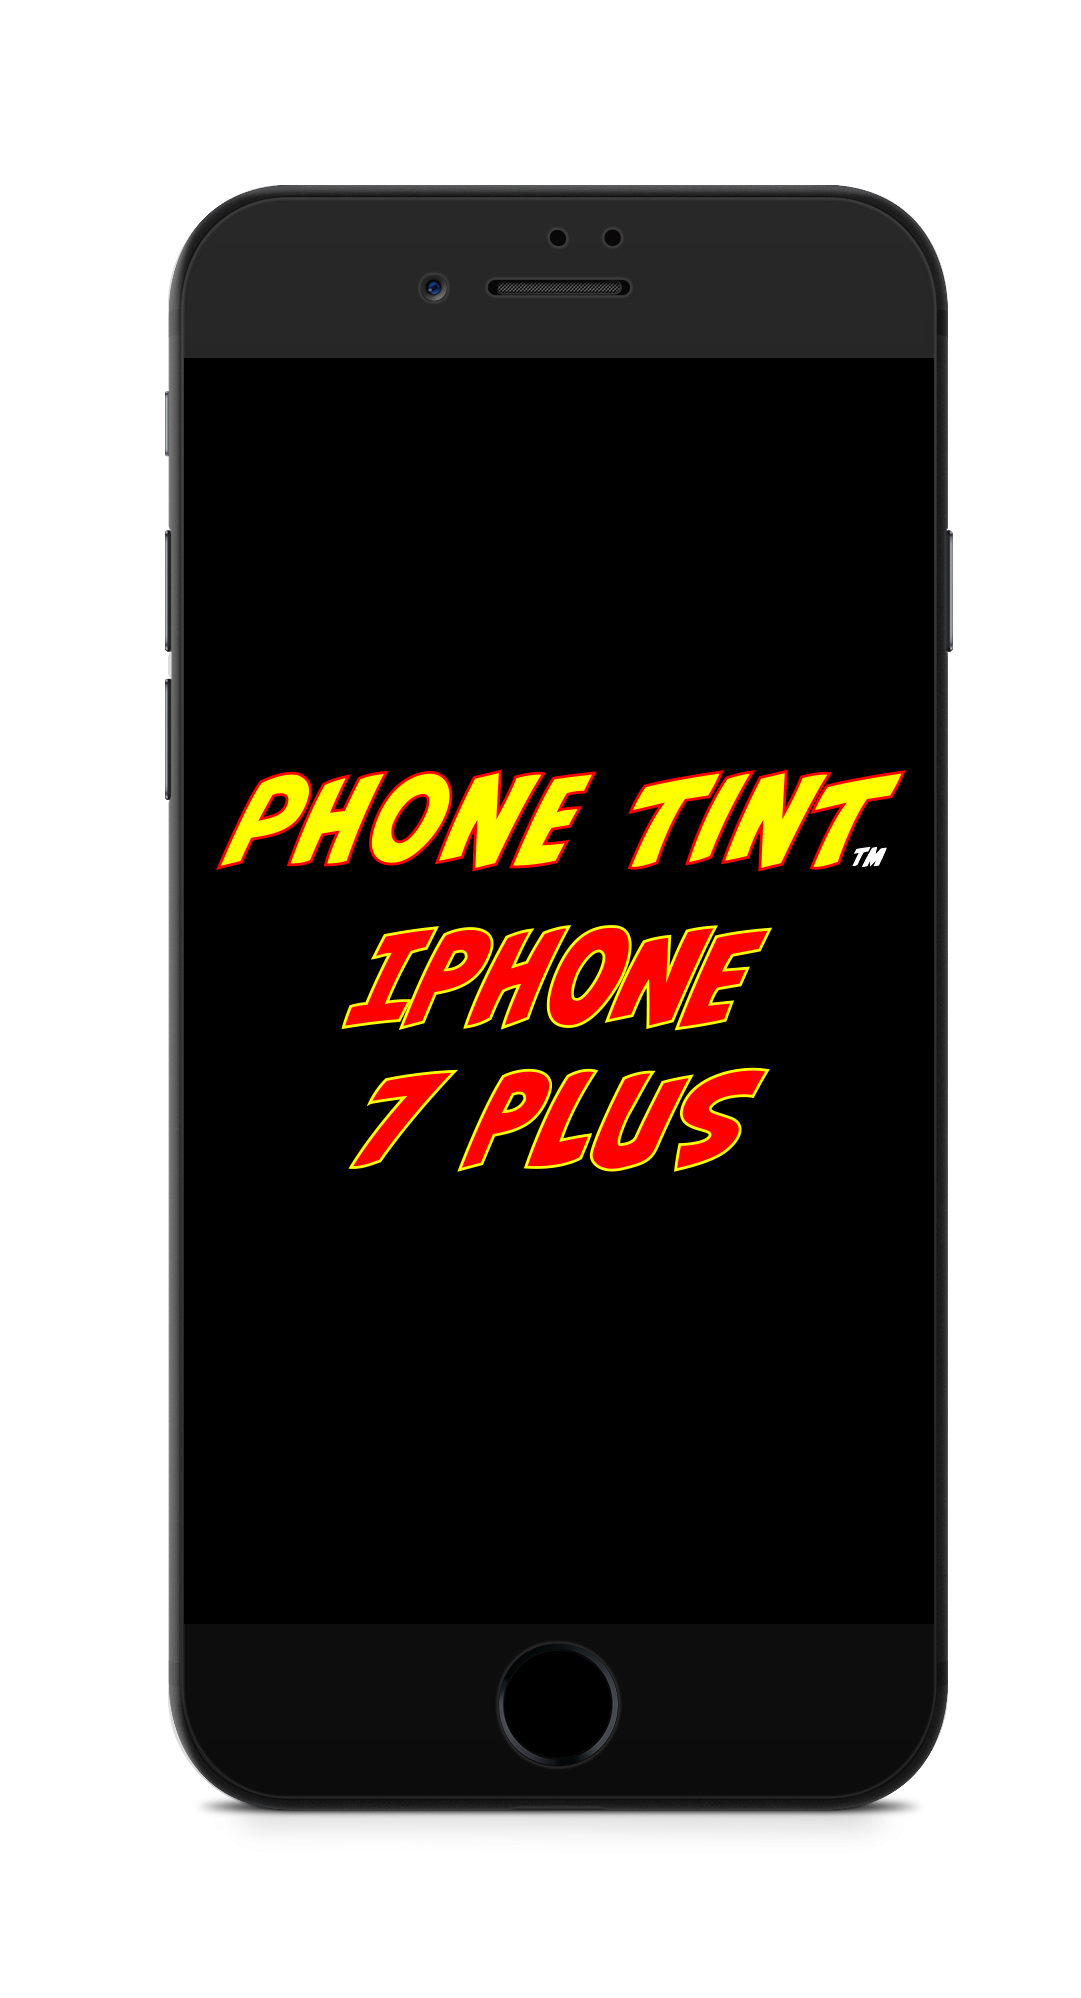 Iphone 7 plus phone tint privacy tempered glass screen protector. SKINZ Edmonton